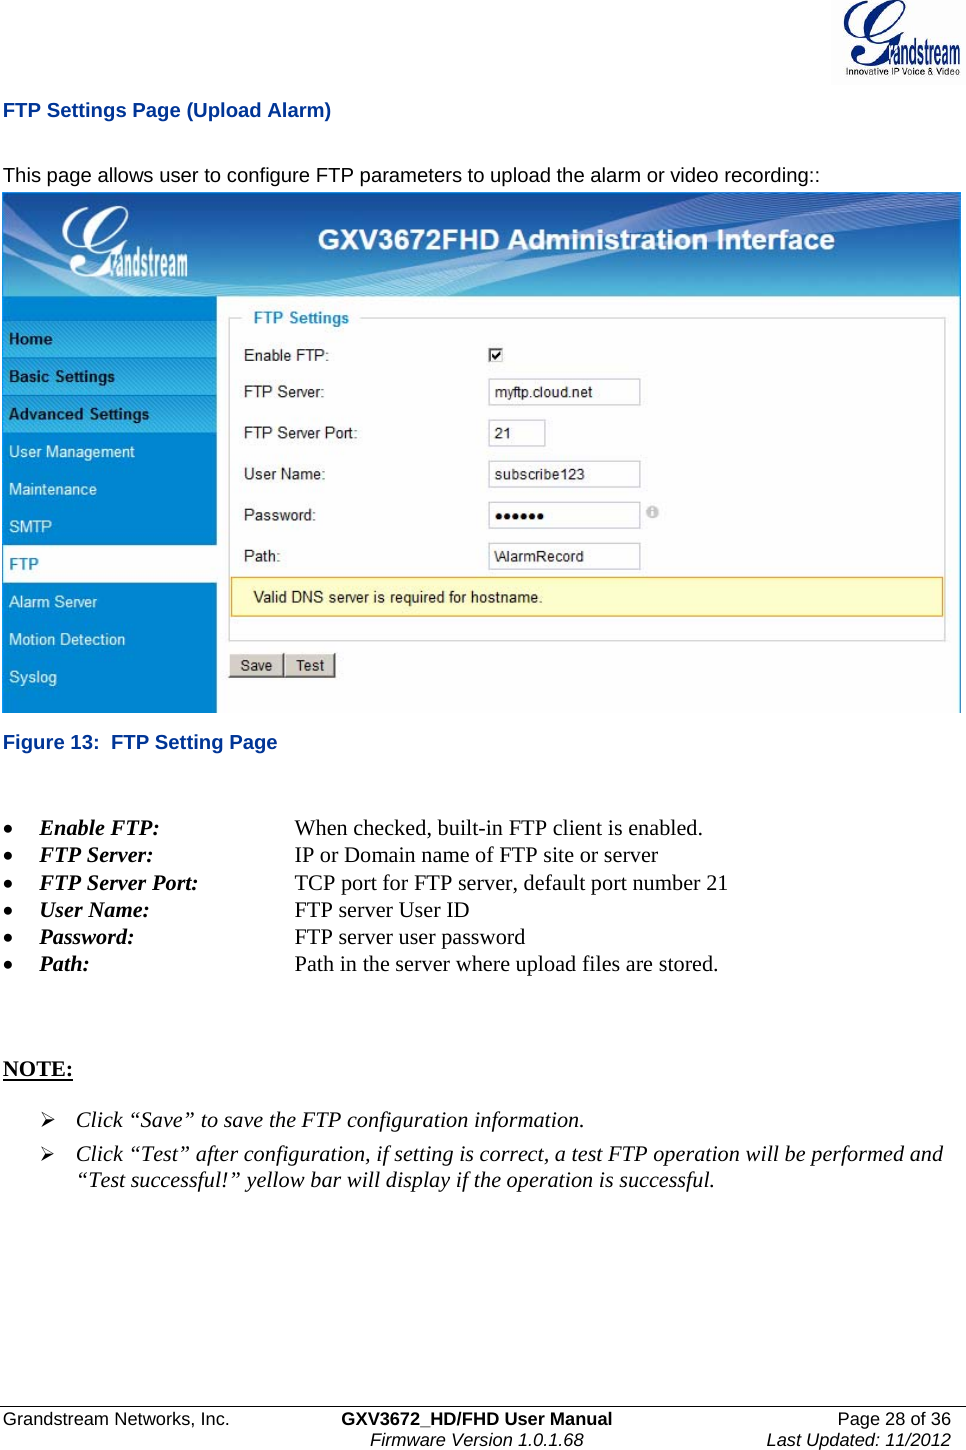  Grandstream Networks, Inc.  GXV3672_HD/FHD User Manual  Page 28 of 36    Firmware Version 1.0.1.68  Last Updated: 11/2012  FTP Settings Page (Upload Alarm)  This page allows user to configure FTP parameters to upload the alarm or video recording::  Figure 13:  FTP Setting Page  • Enable FTP:     When checked, built-in FTP client is enabled.  • FTP Server:     IP or Domain name of FTP site or server • FTP Server Port:     TCP port for FTP server, default port number 21 • User Name:     FTP server User ID • Password:      FTP server user password • Path:       Path in the server where upload files are stored.     NOTE:   ¾ Click “Save” to save the FTP configuration information. ¾ Click “Test” after configuration, if setting is correct, a test FTP operation will be performed and “Test successful!” yellow bar will display if the operation is successful.  